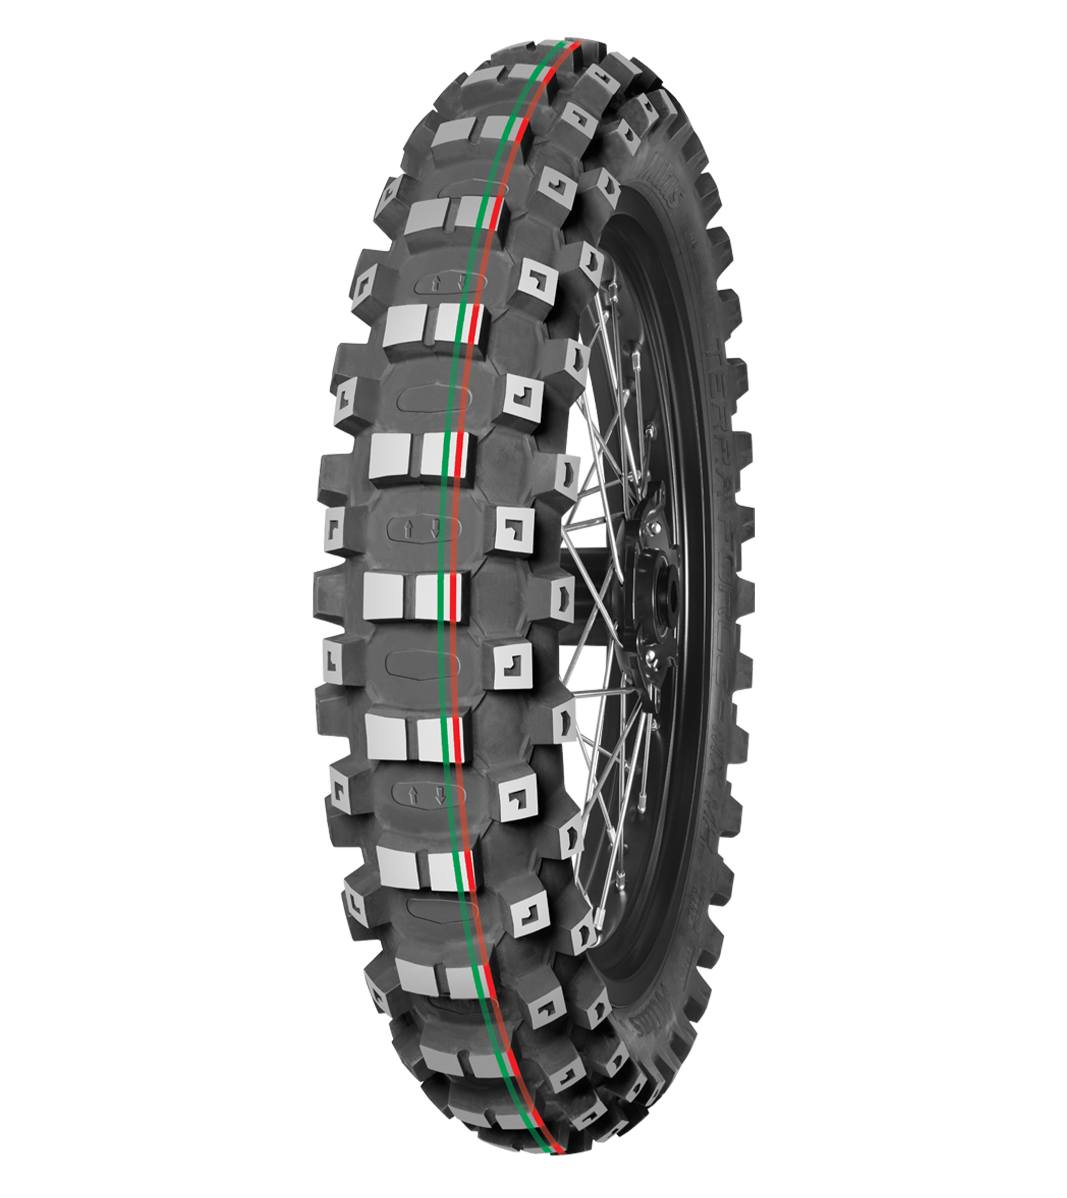 Mitas TERRA FORCE-MX MH 70/100-10 Motocross Competition Off-Road MEDIUM TO HARD 41J Red & Green Tube Rear Tire, 226151, 70/100-10, Motocross, Motocross Competition, Off-Road, Rear, Terra Force, Terra Force-MX MH, Trail, Tires - Imported and distributed in North & South America by Lindeco Genuine Powersports - Premier Powersports Equipment and Accessories for Motorcycle Enthusiasts, Professional Riders and Dealers.